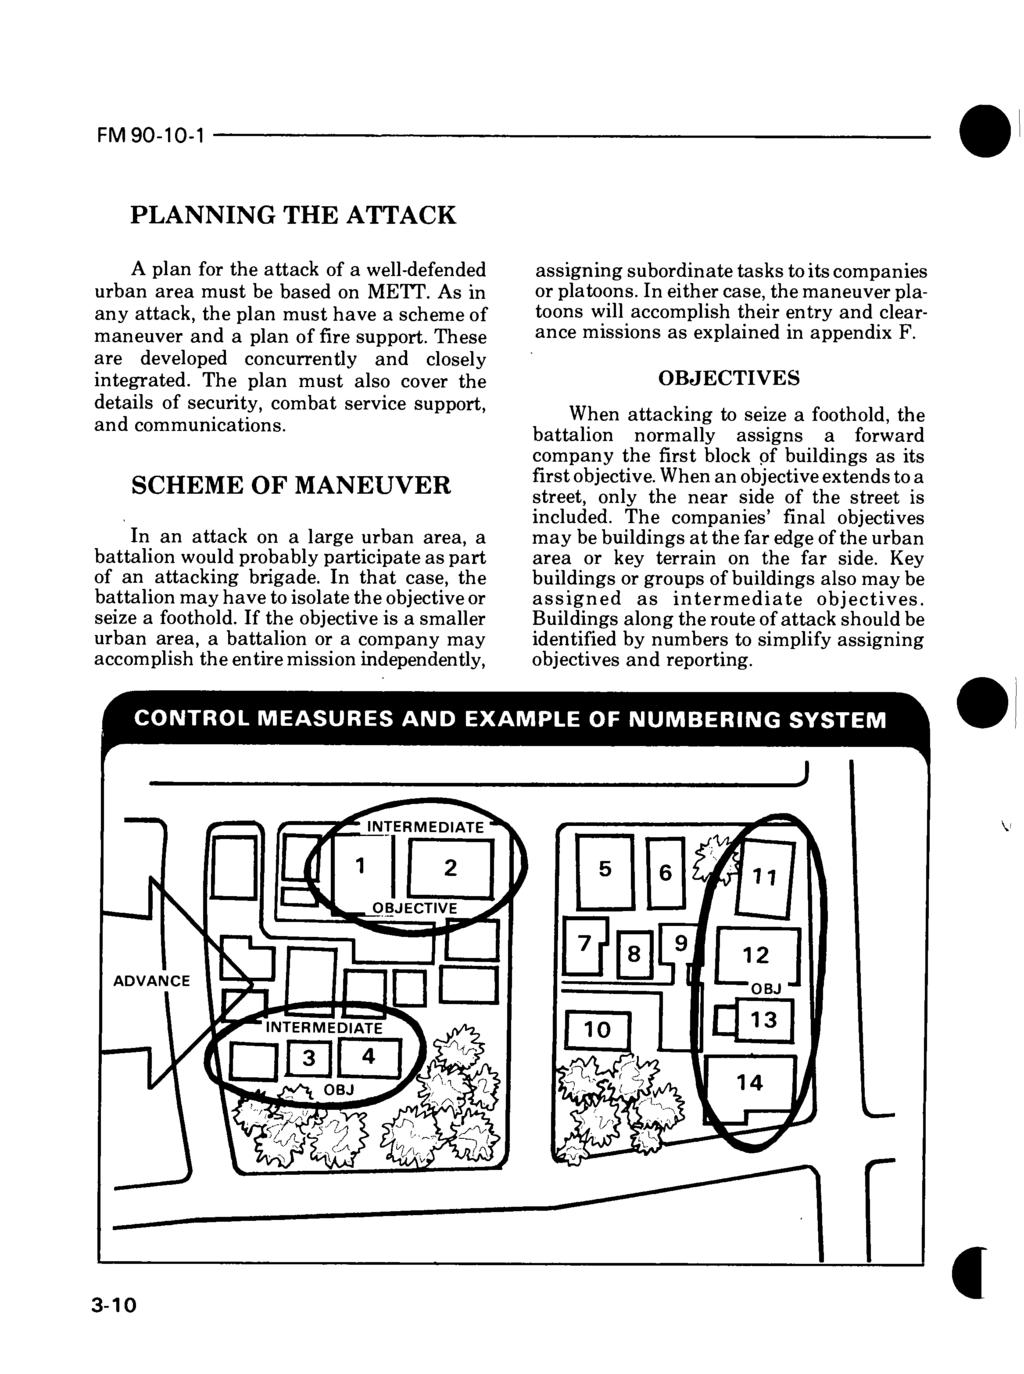 PLANNING THE ATTACK A plan for the attack of a well-defended urban area must be based on METT. As in any attack, the plan must have a scheme of maneuver and a plan of fire support.